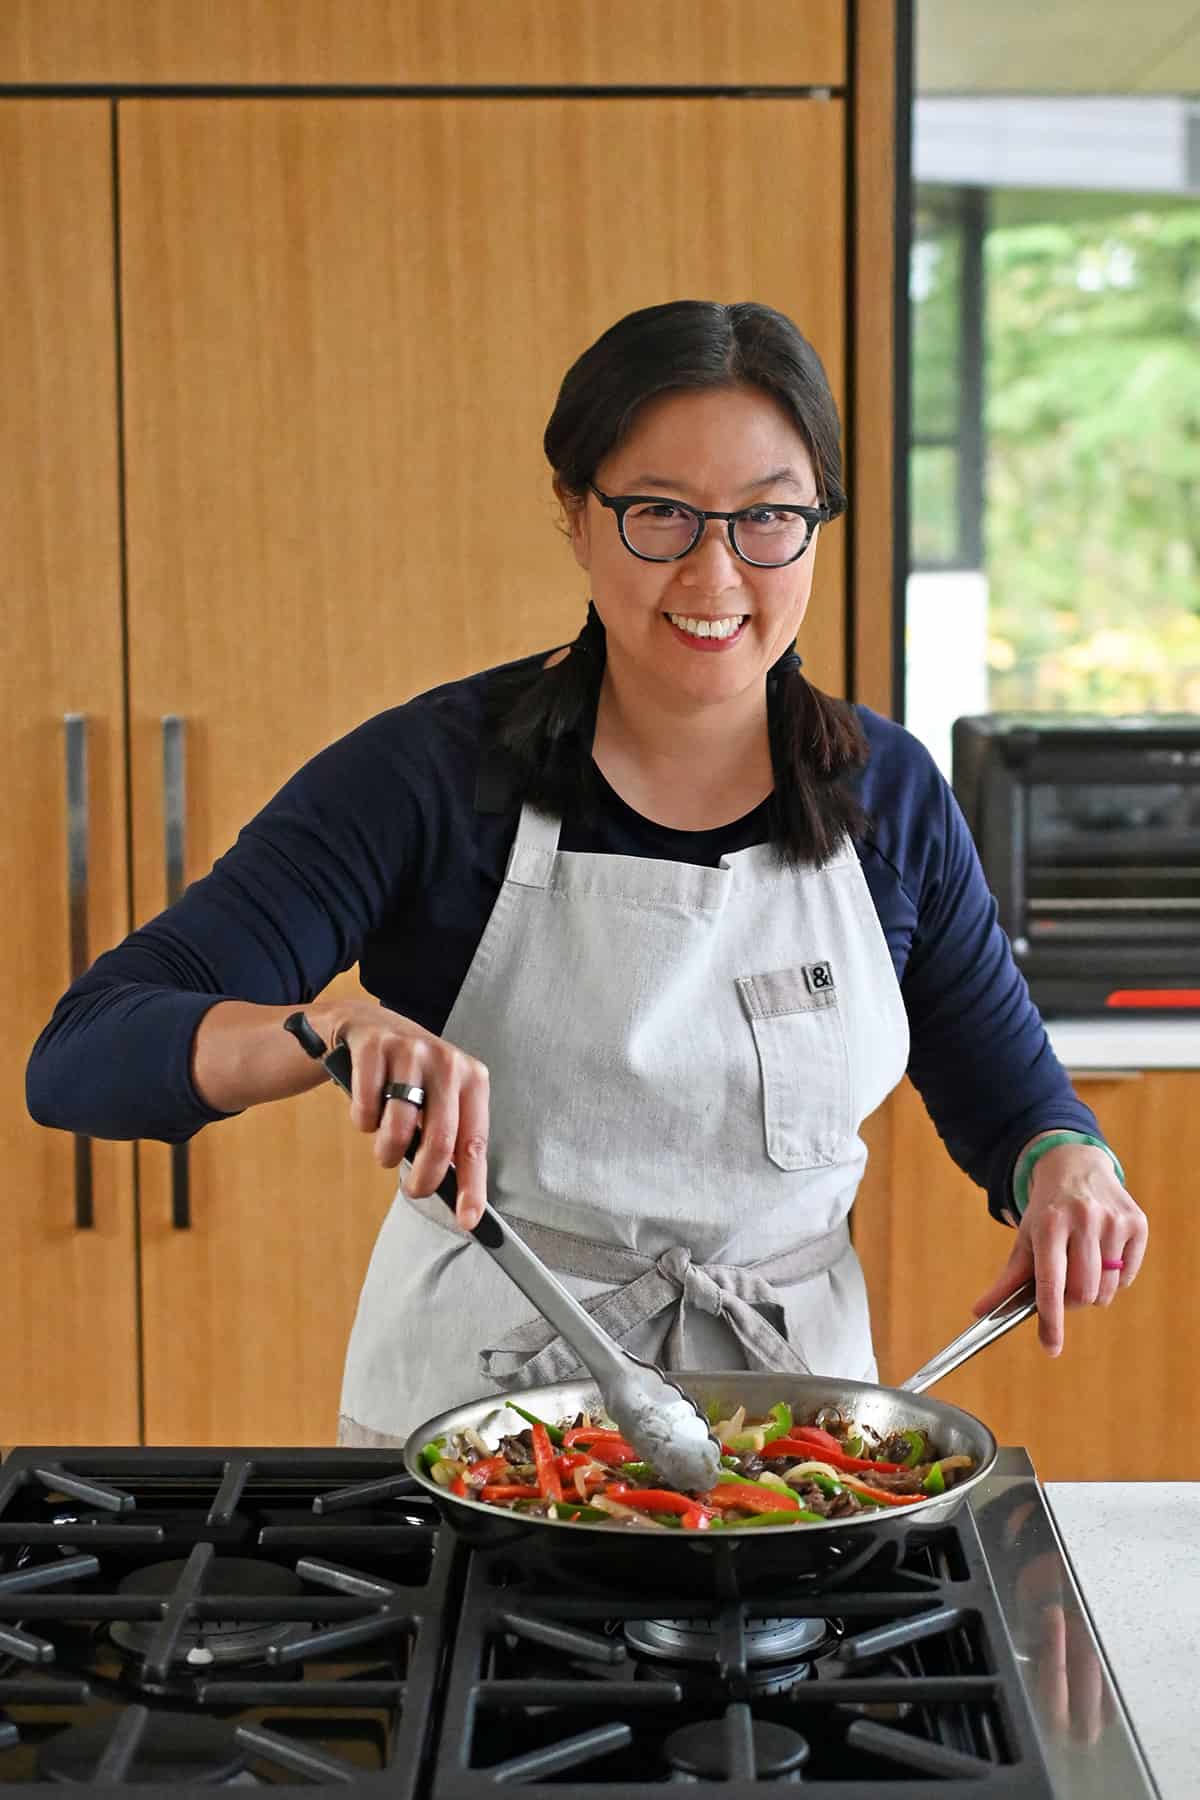 A photo of Michelle Tam of Nom Nom Paleo, an Asian woman in glasses, cooking a stir-fry on a range in a home kitchen